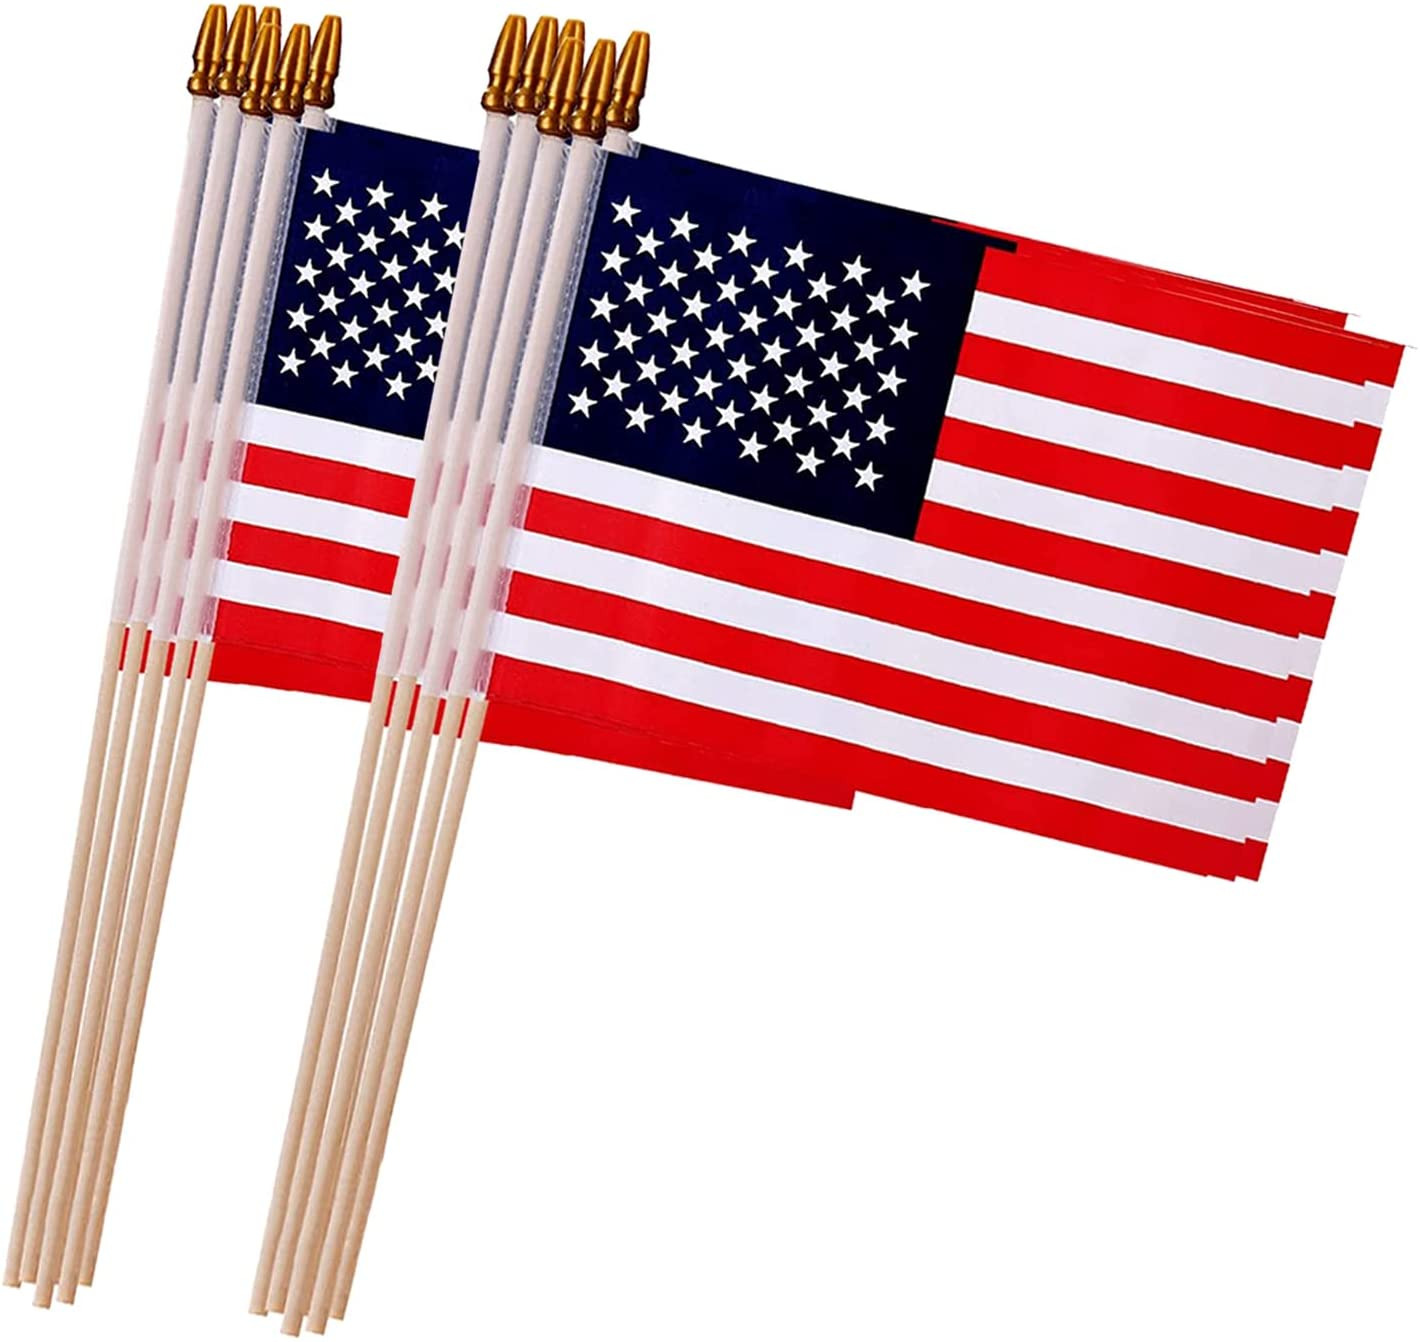 12 Pack Small American Flags on Stick, 5x8 Inch Small Flags/ American Hand Held